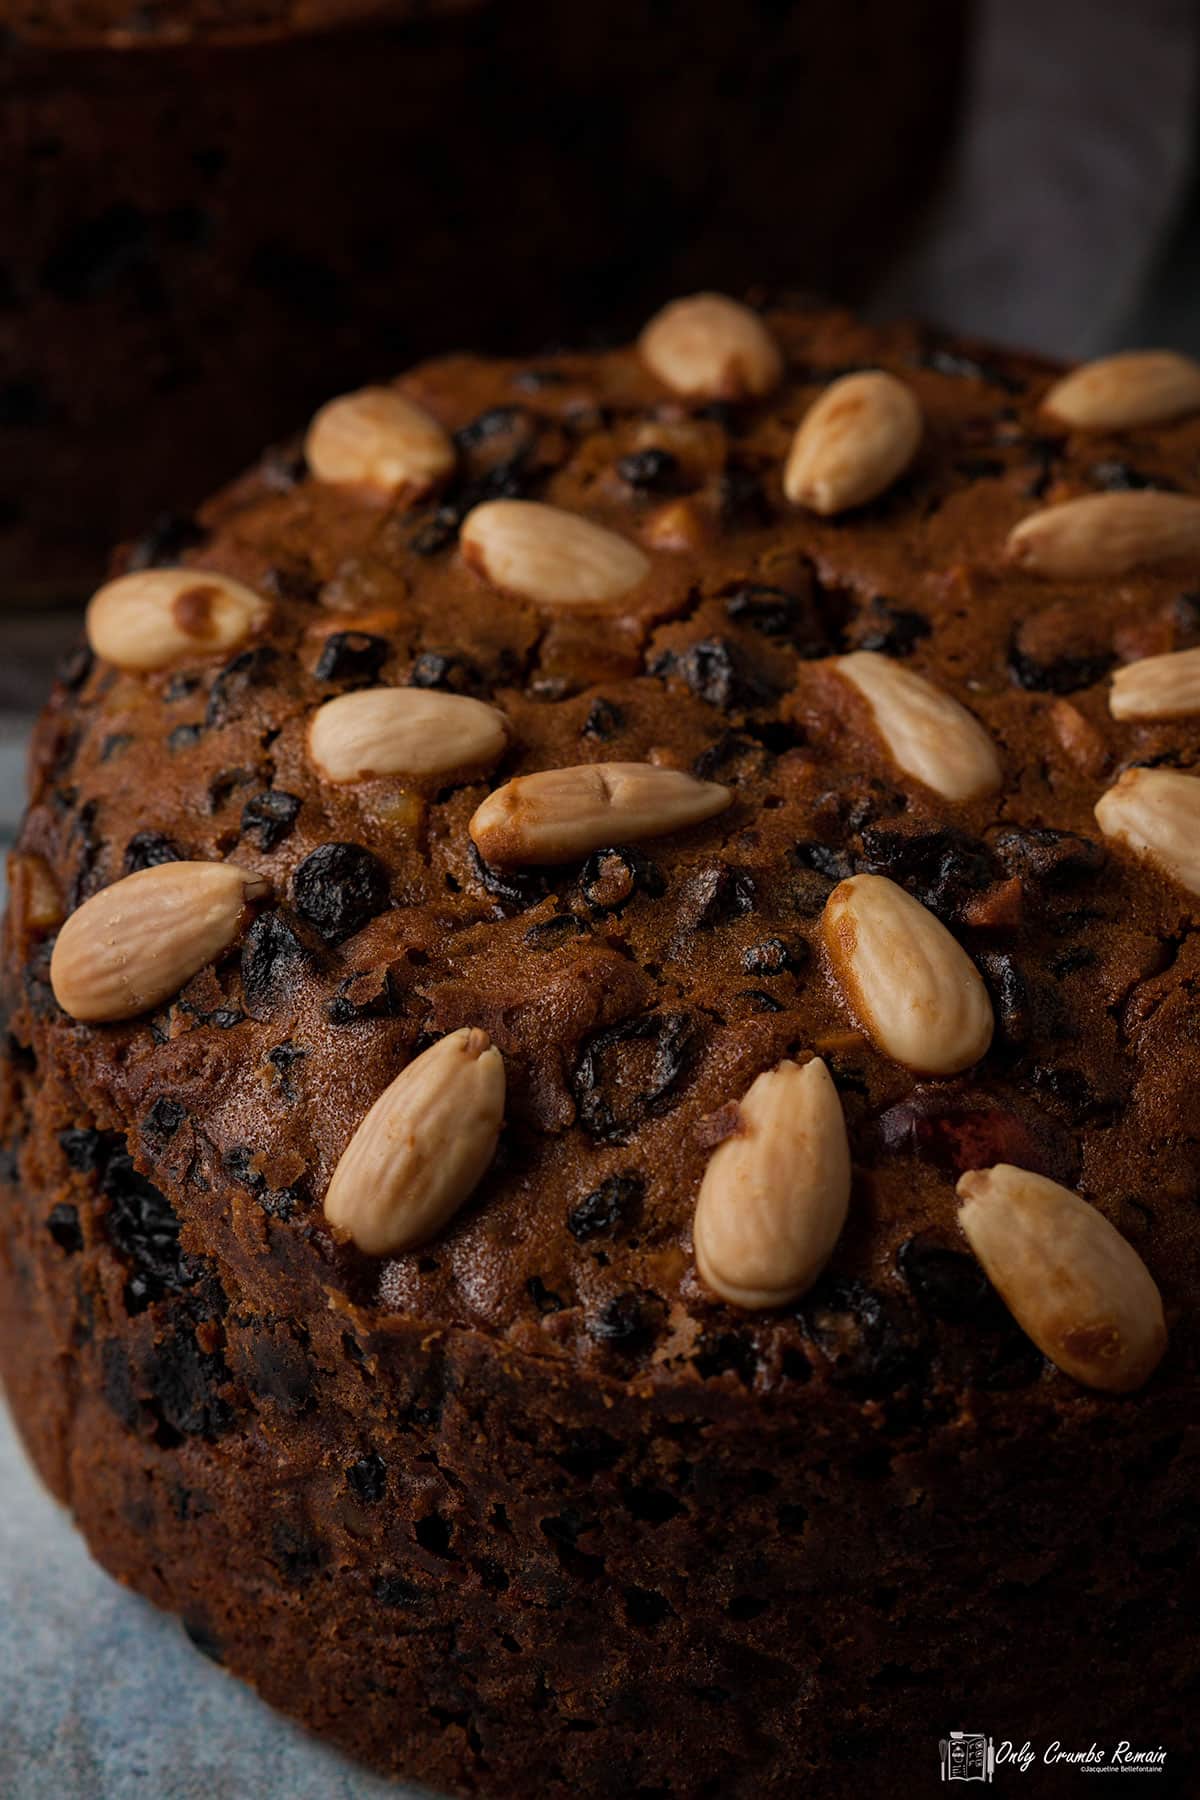 rich fruit cake with blanched almonds on top.